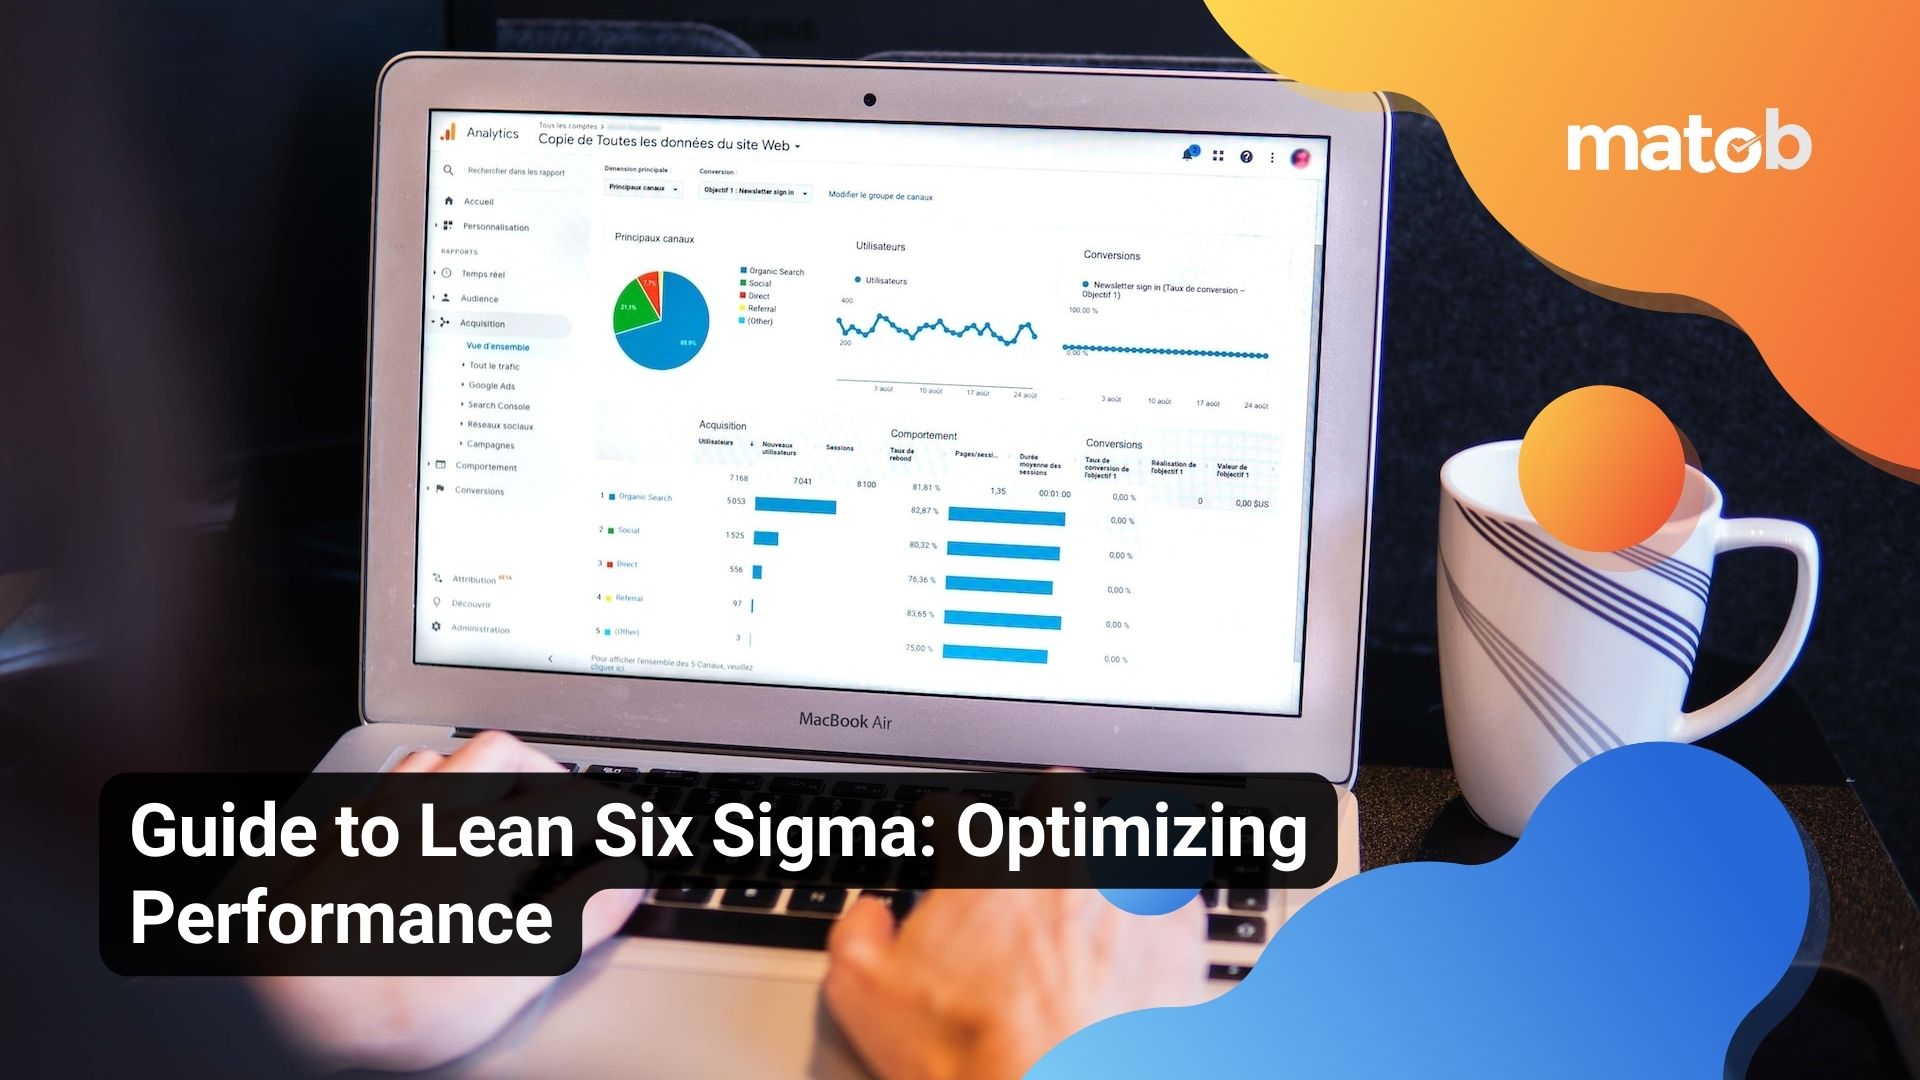 Guide to Lean Six Sigma: Optimizing Performance